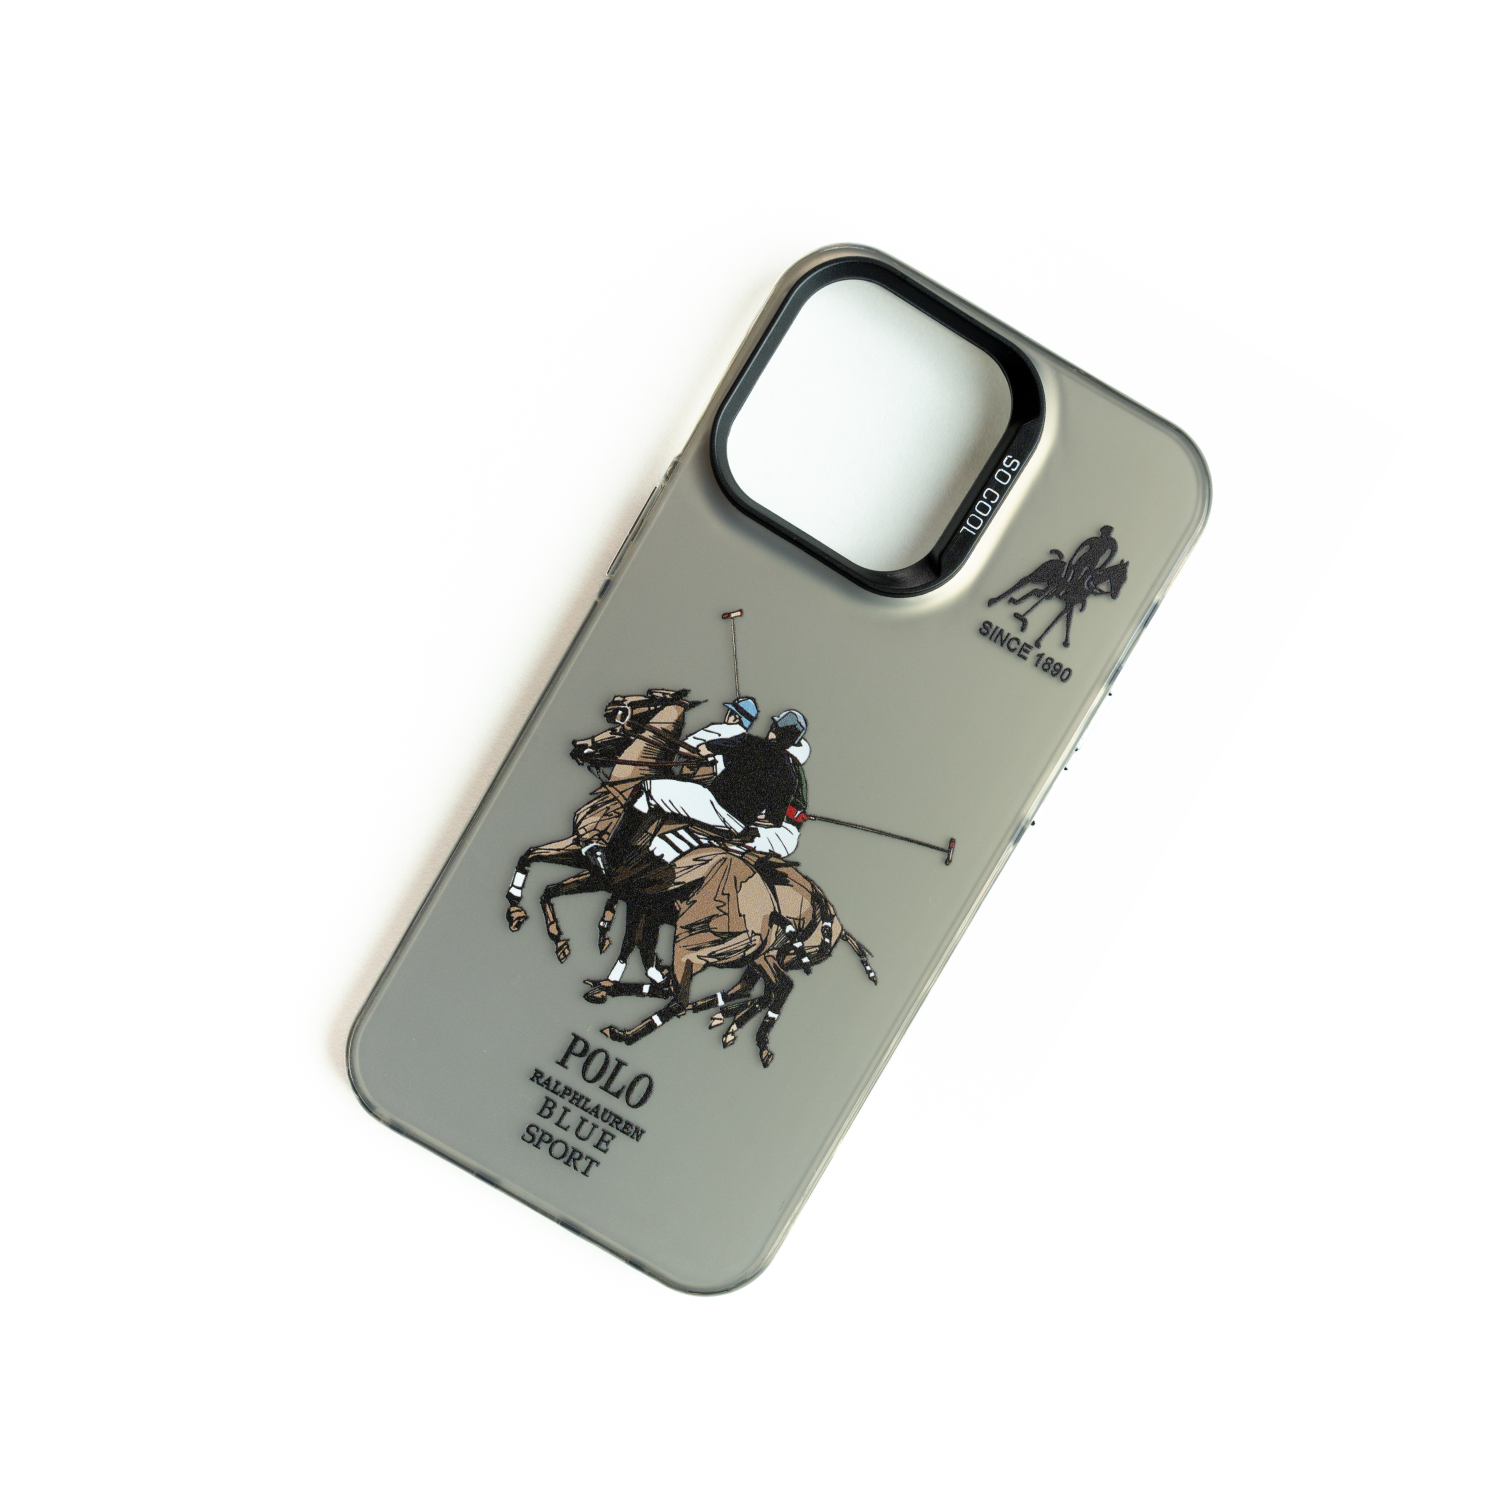 Iphone Case - So Cool Series - Polo